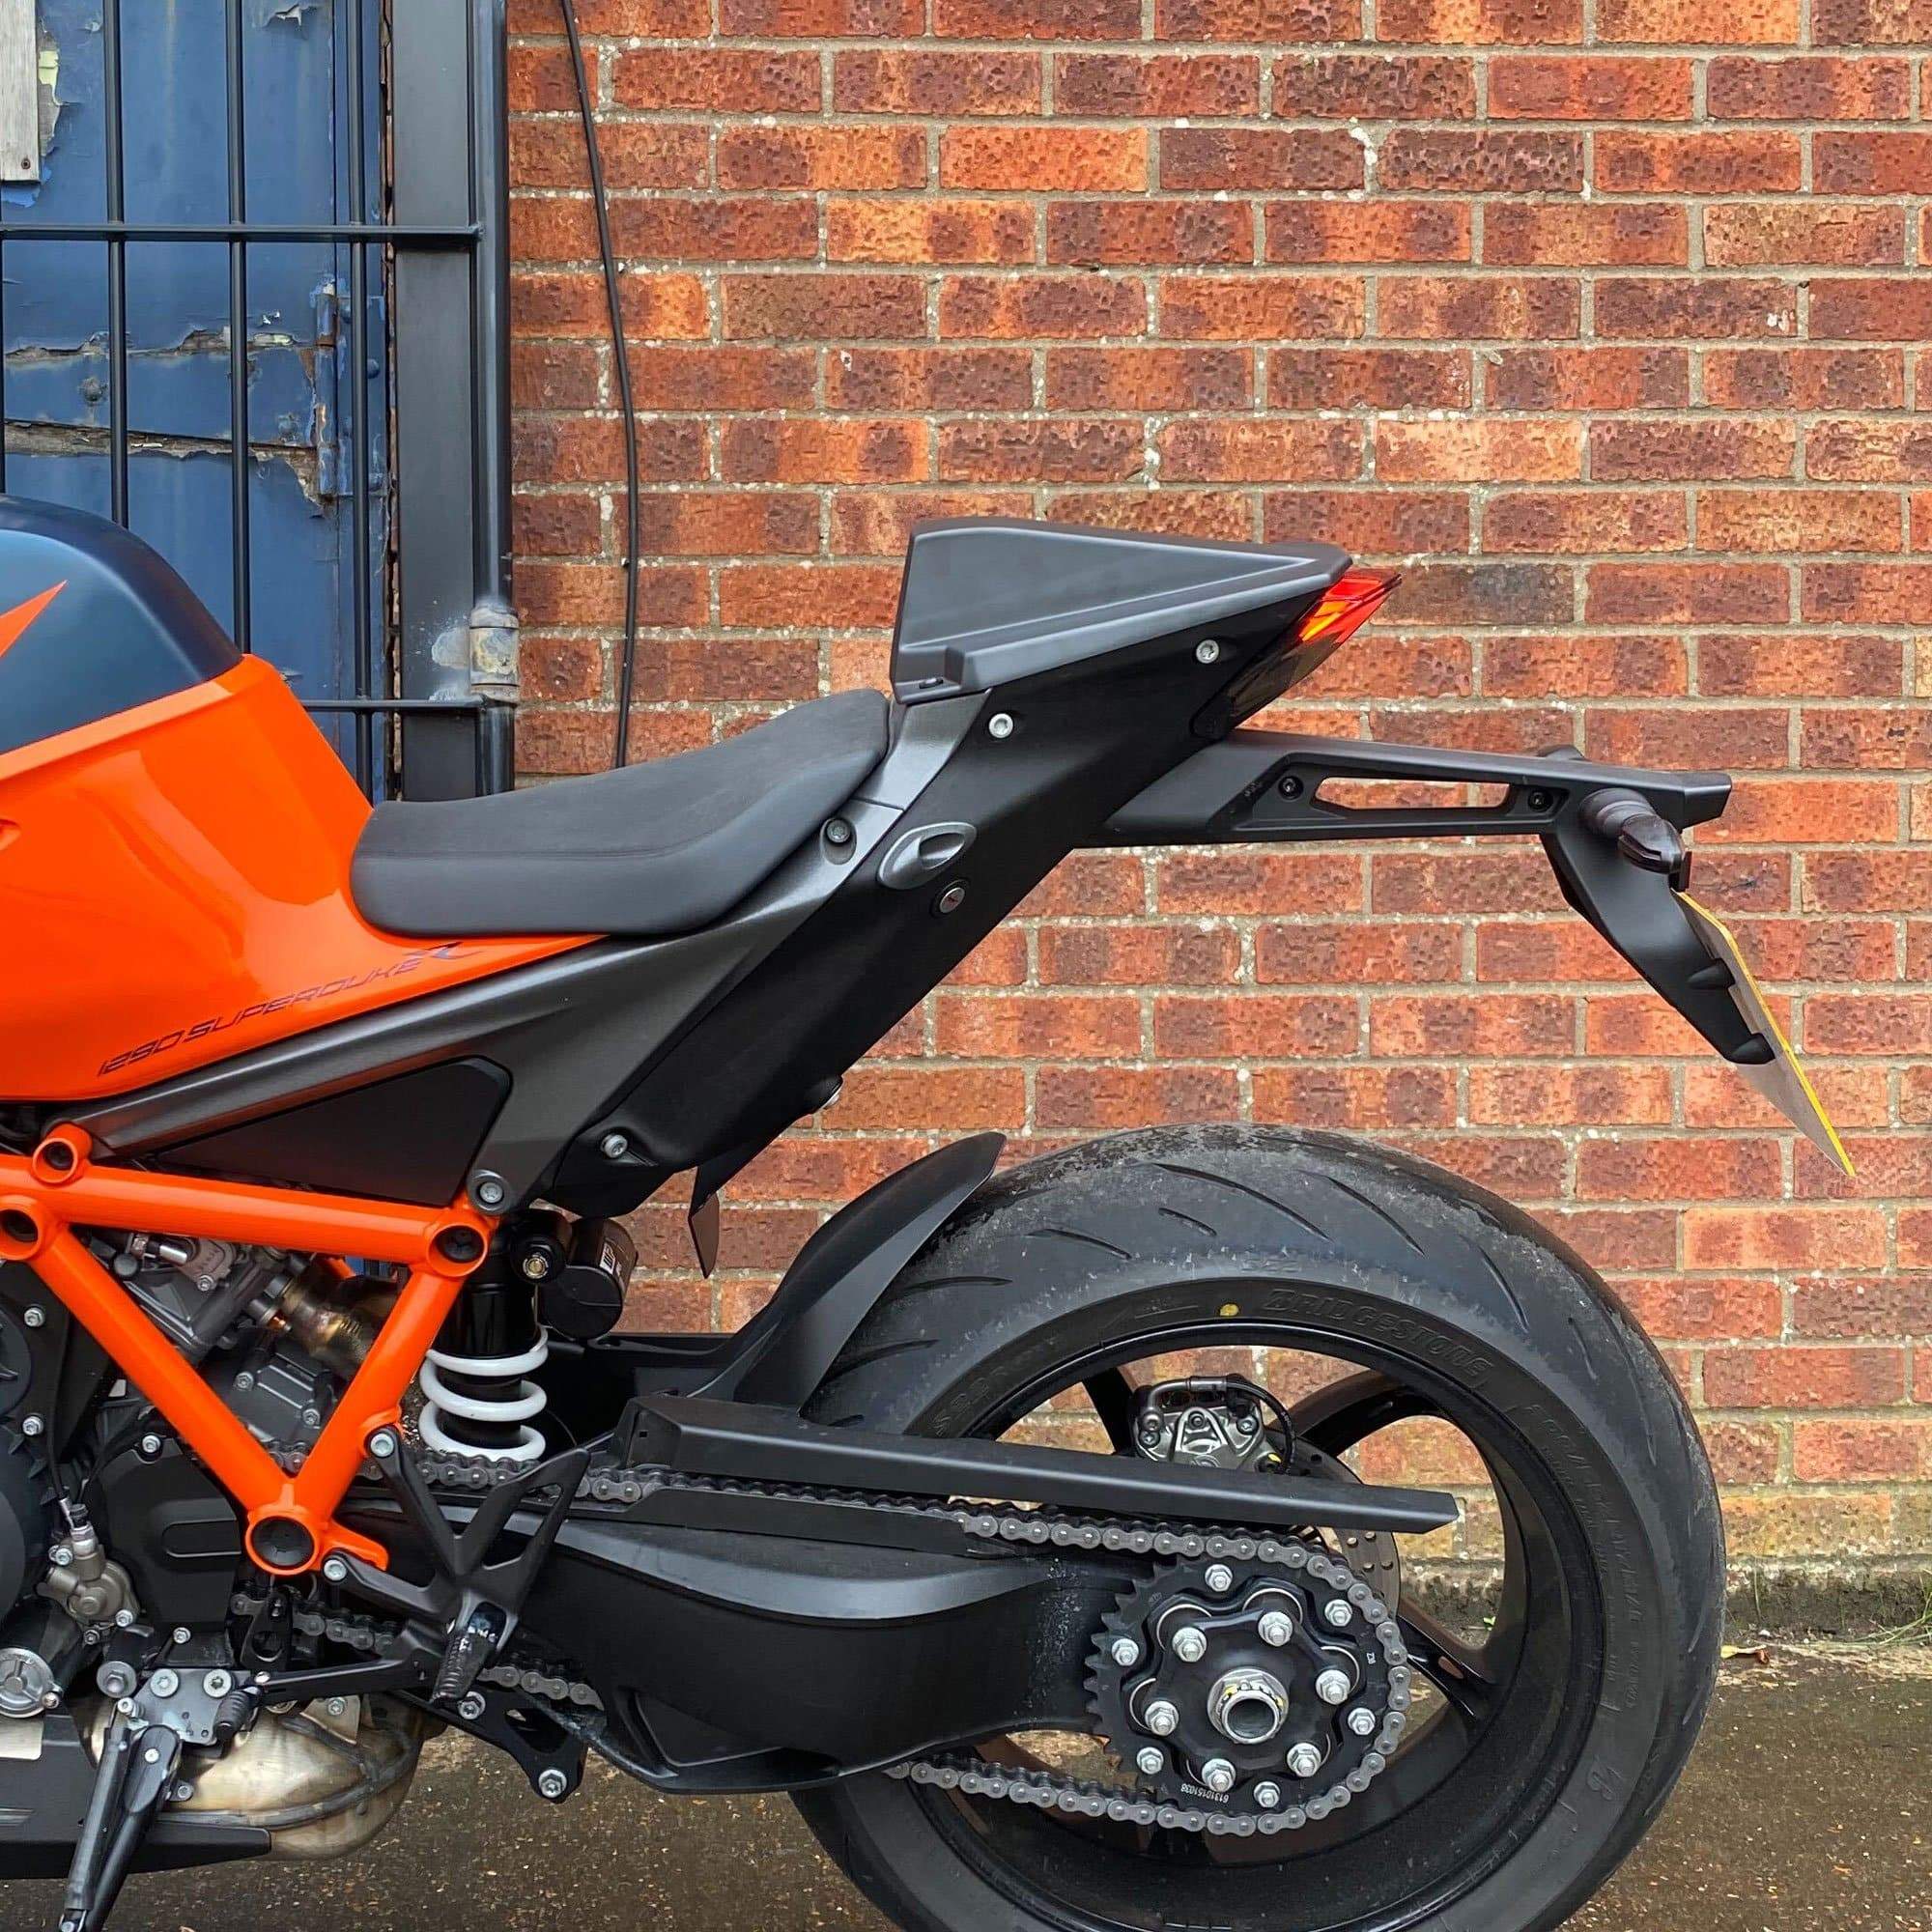 Pyramid Seat Cowl | Matte Black | KTM 1290 Superduke R 2020>Current-19990M-Seat Cowls-Pyramid Motorcycle Accessories